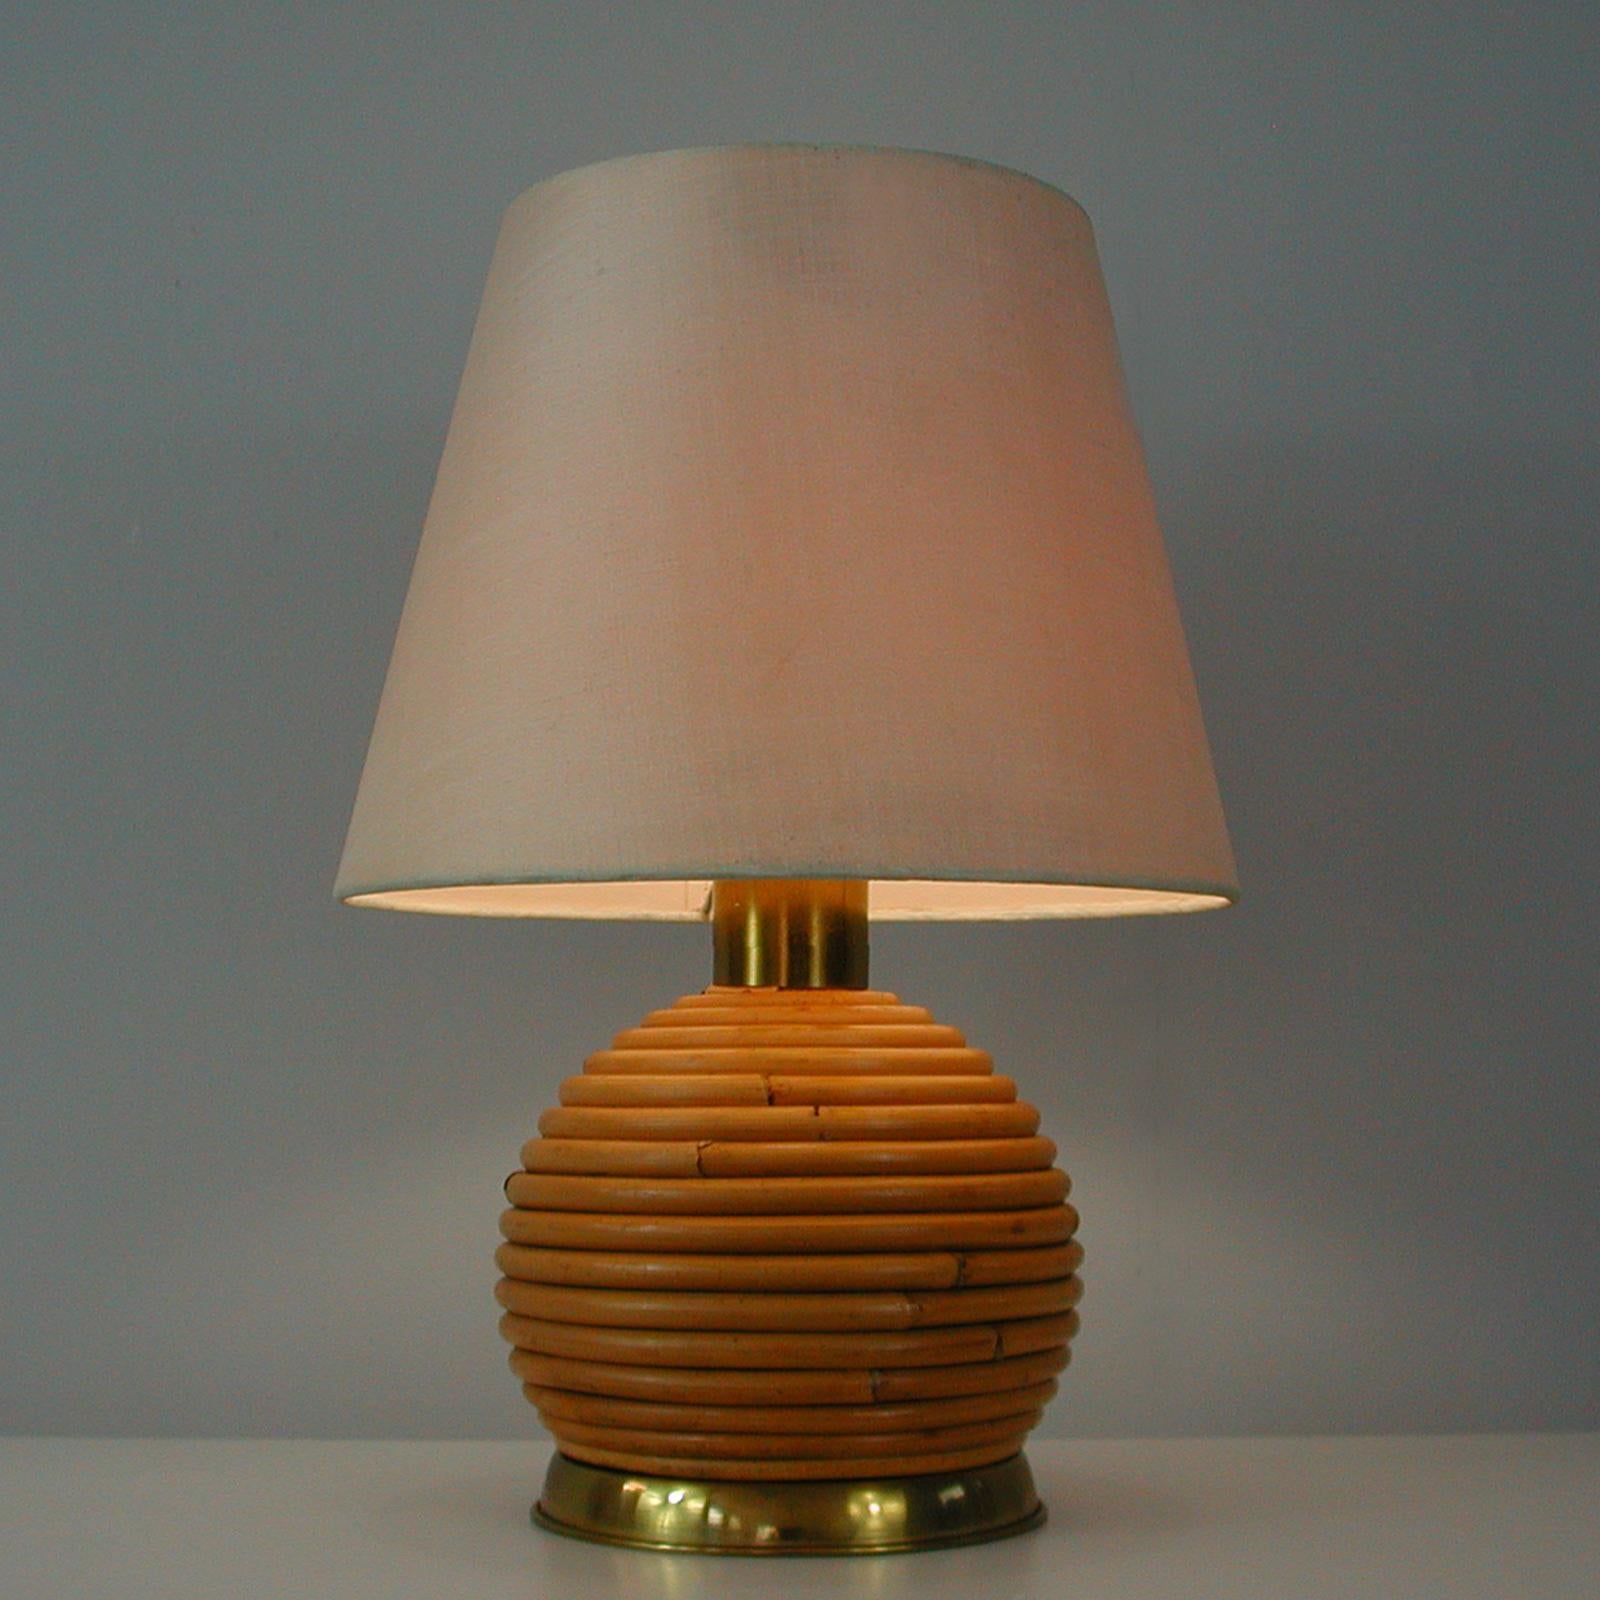 Mid-20th Century Midcentury Bamboo and Brass Globe Table Lamp, Vivai del Sud attr. Italy 1960s For Sale